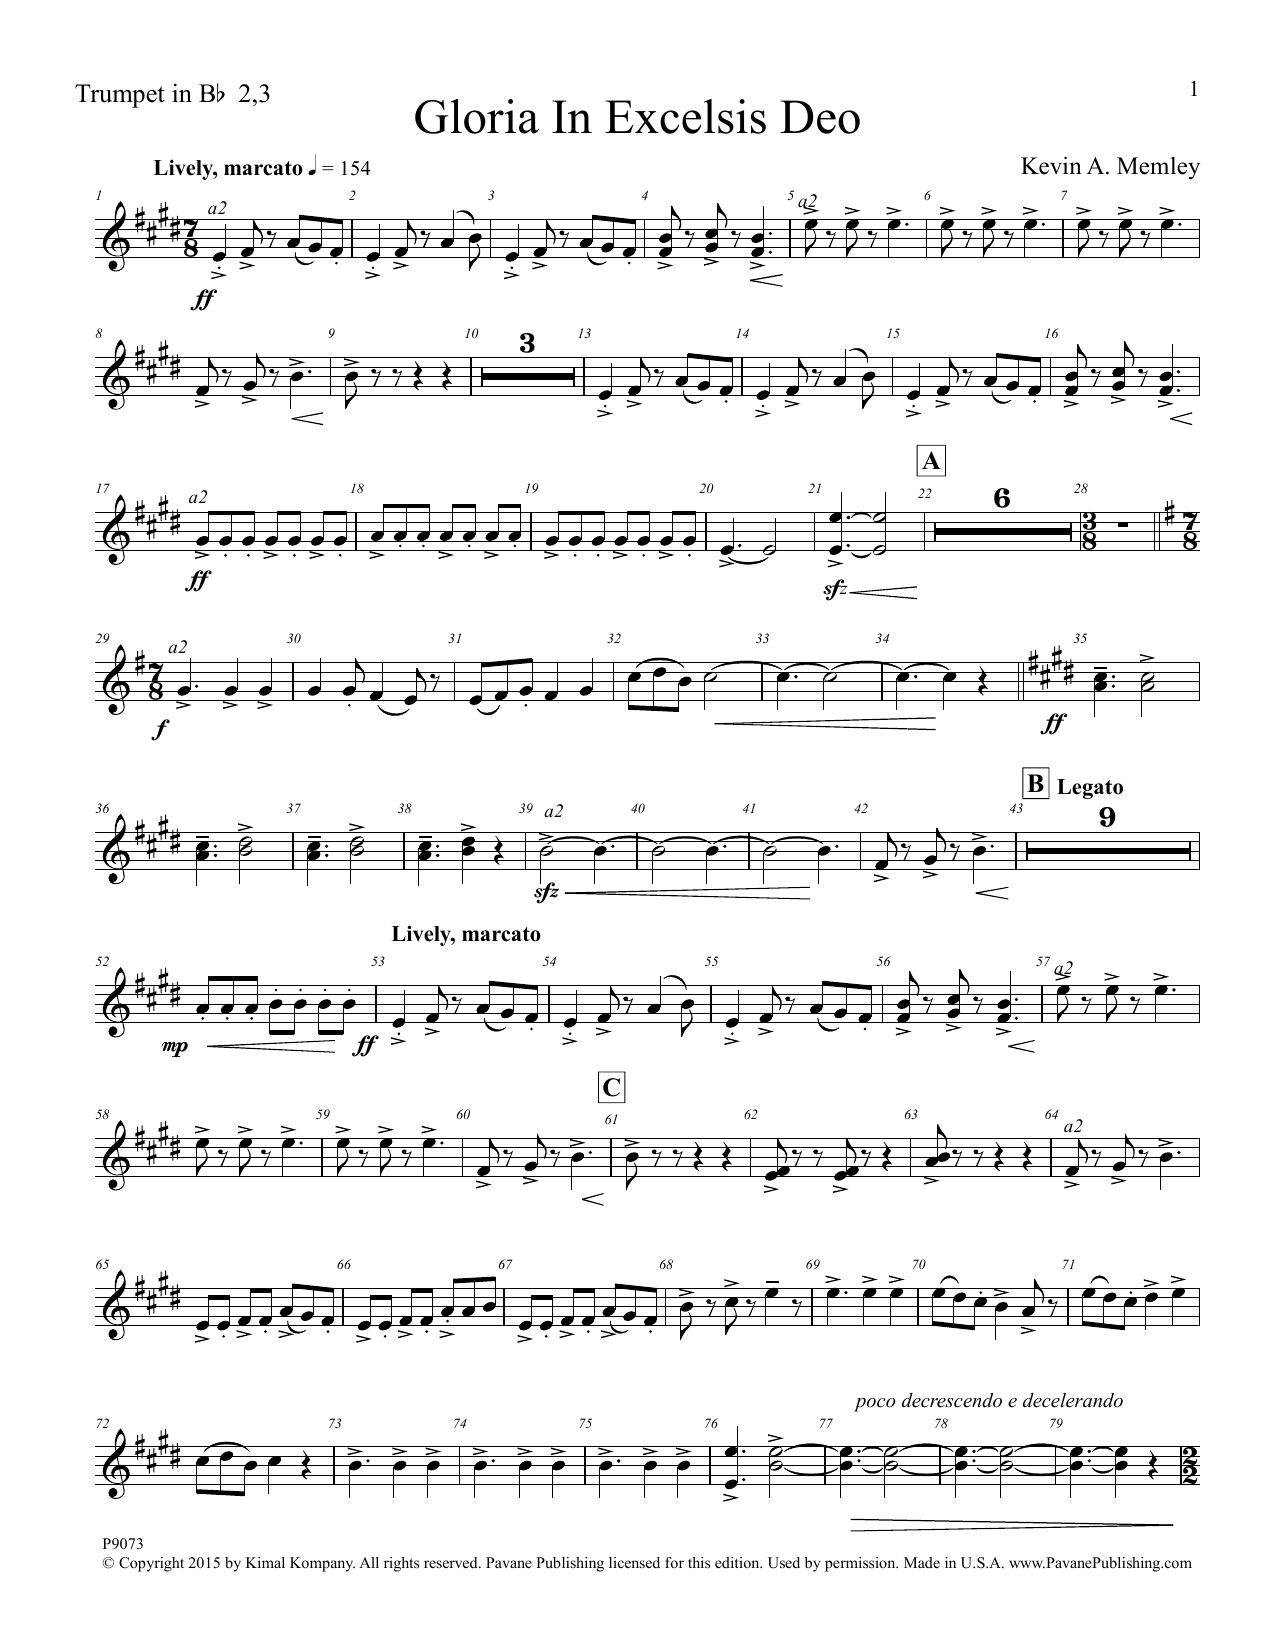 Download Kevin A. Memley Gloria in Excelsis Deo - Trumpet 2 & 3 Sheet Music